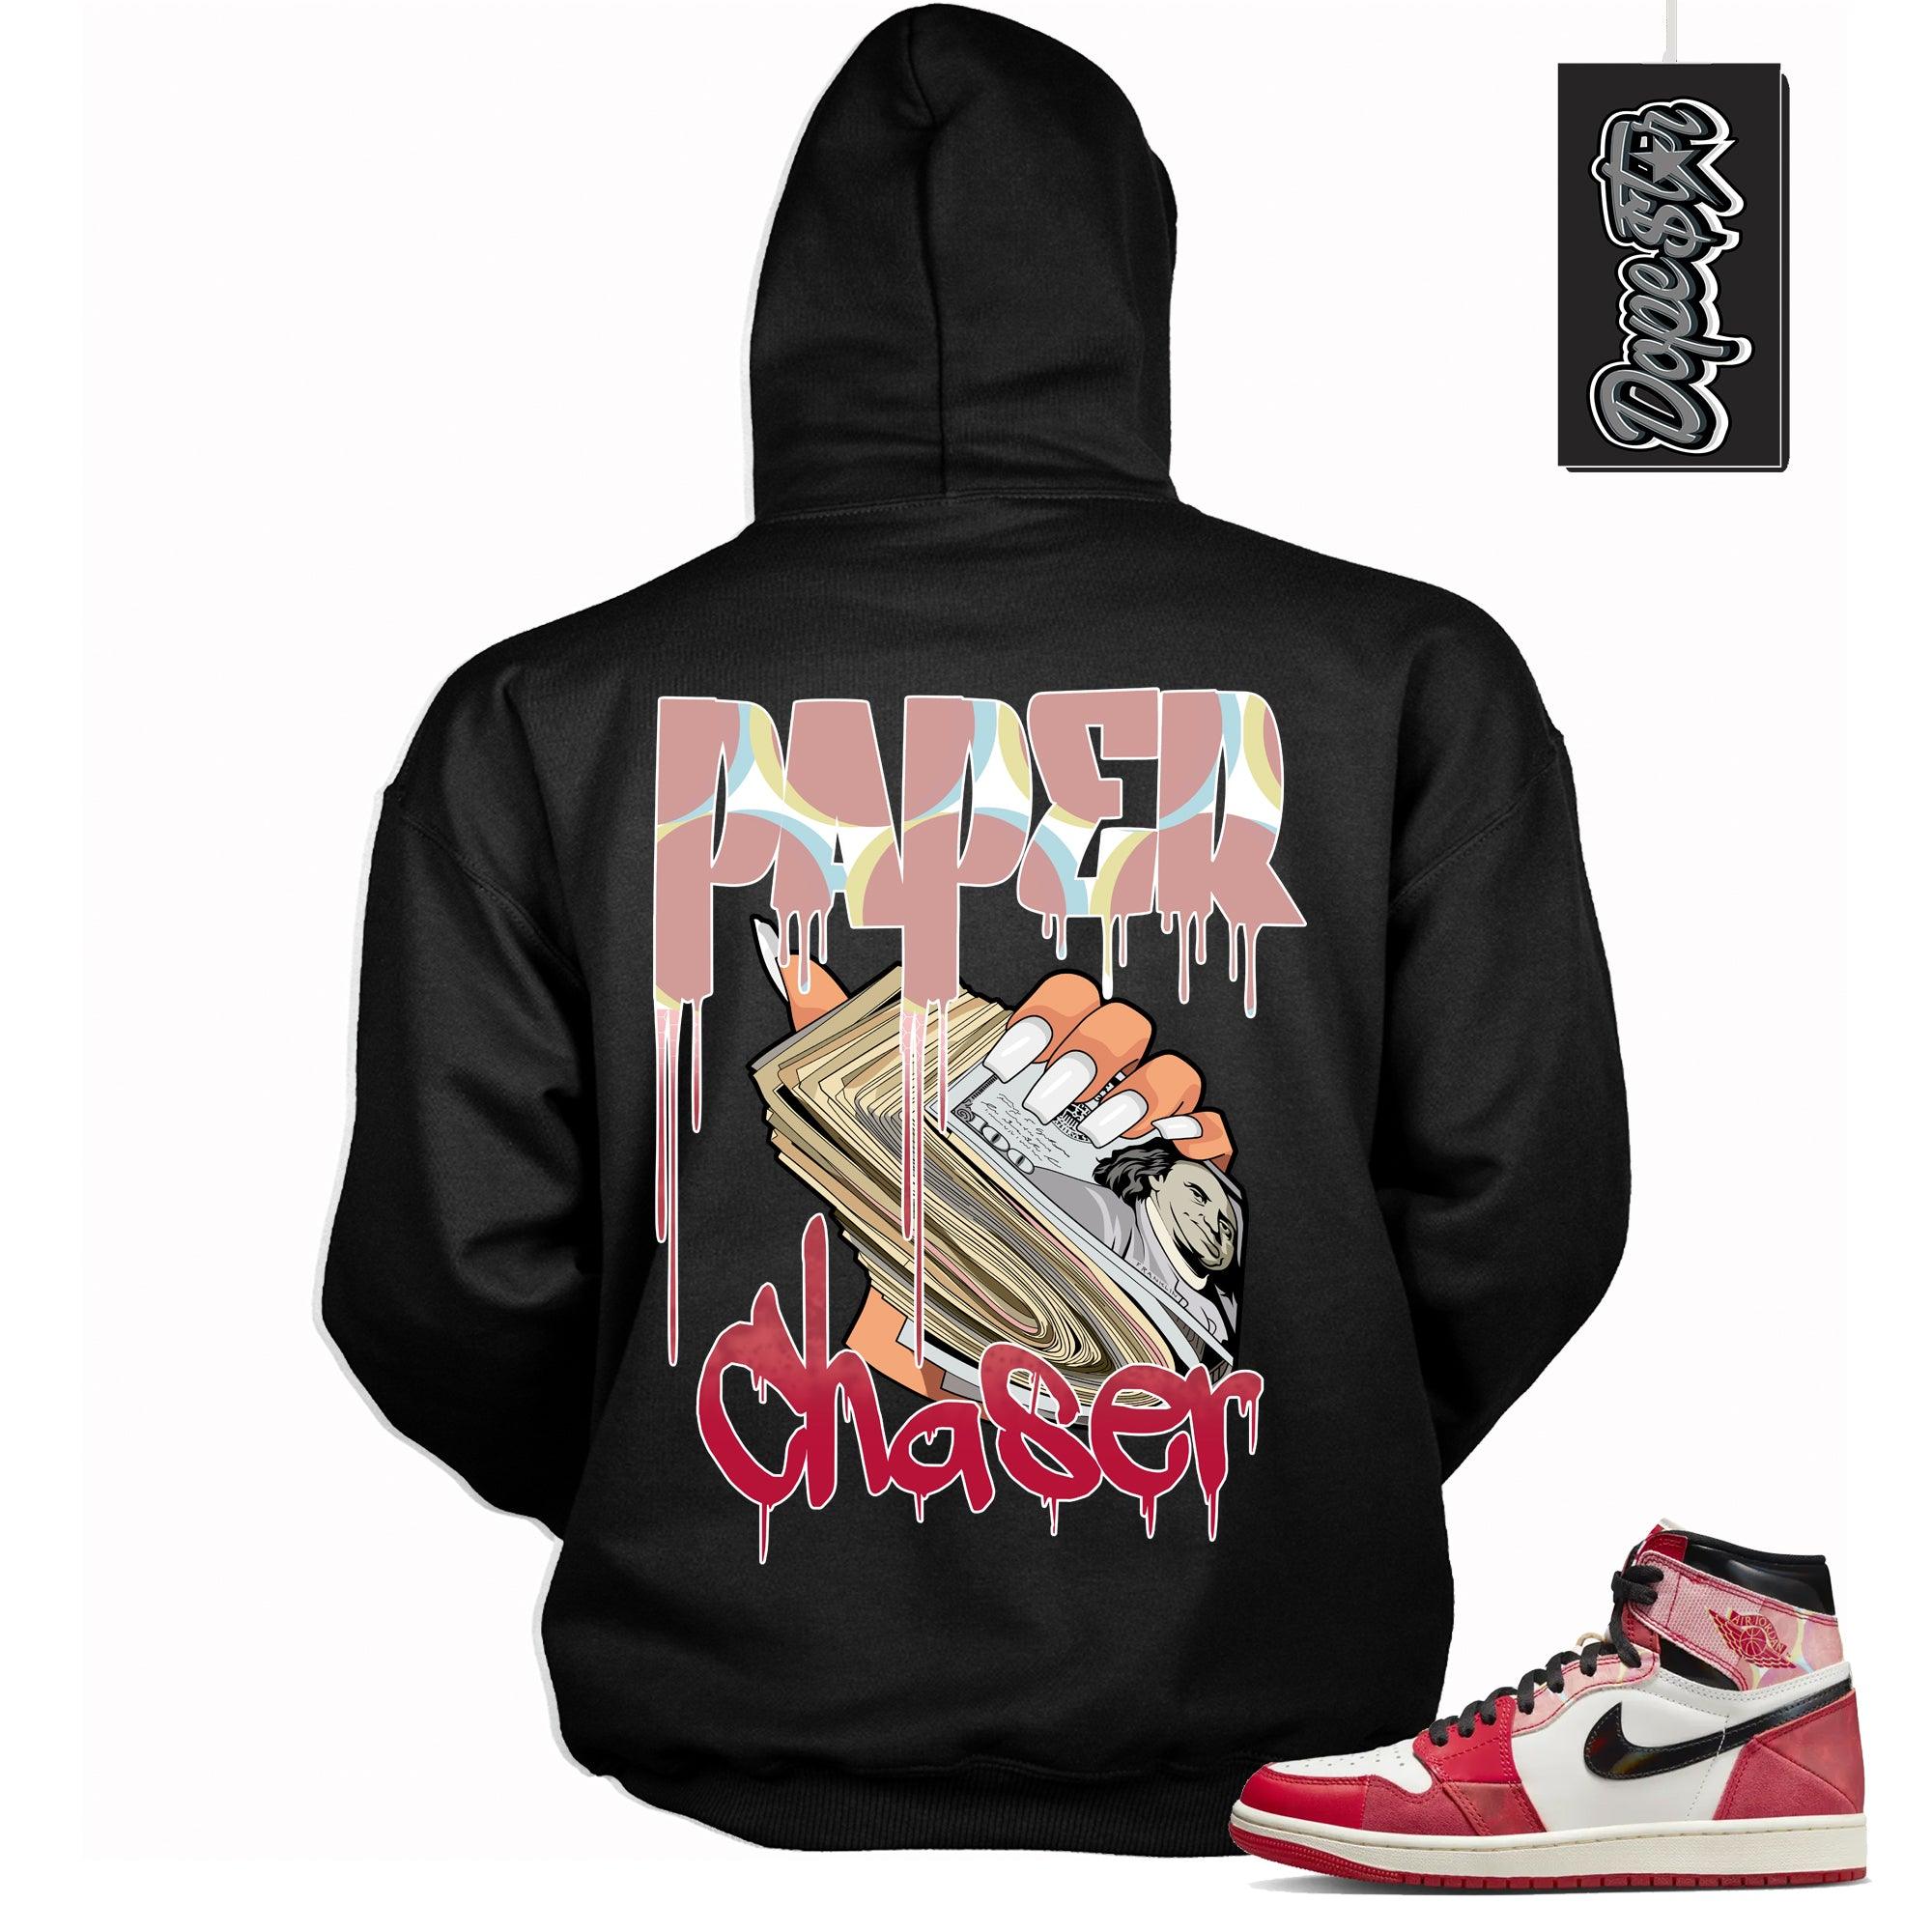 Cool Black graphic tee with “ Paper Chaser ” print, that perfectly matches AIR JORDAN 1 Retro High OG NEXT CHAPTER SPIDER-VERSE  sneakers 